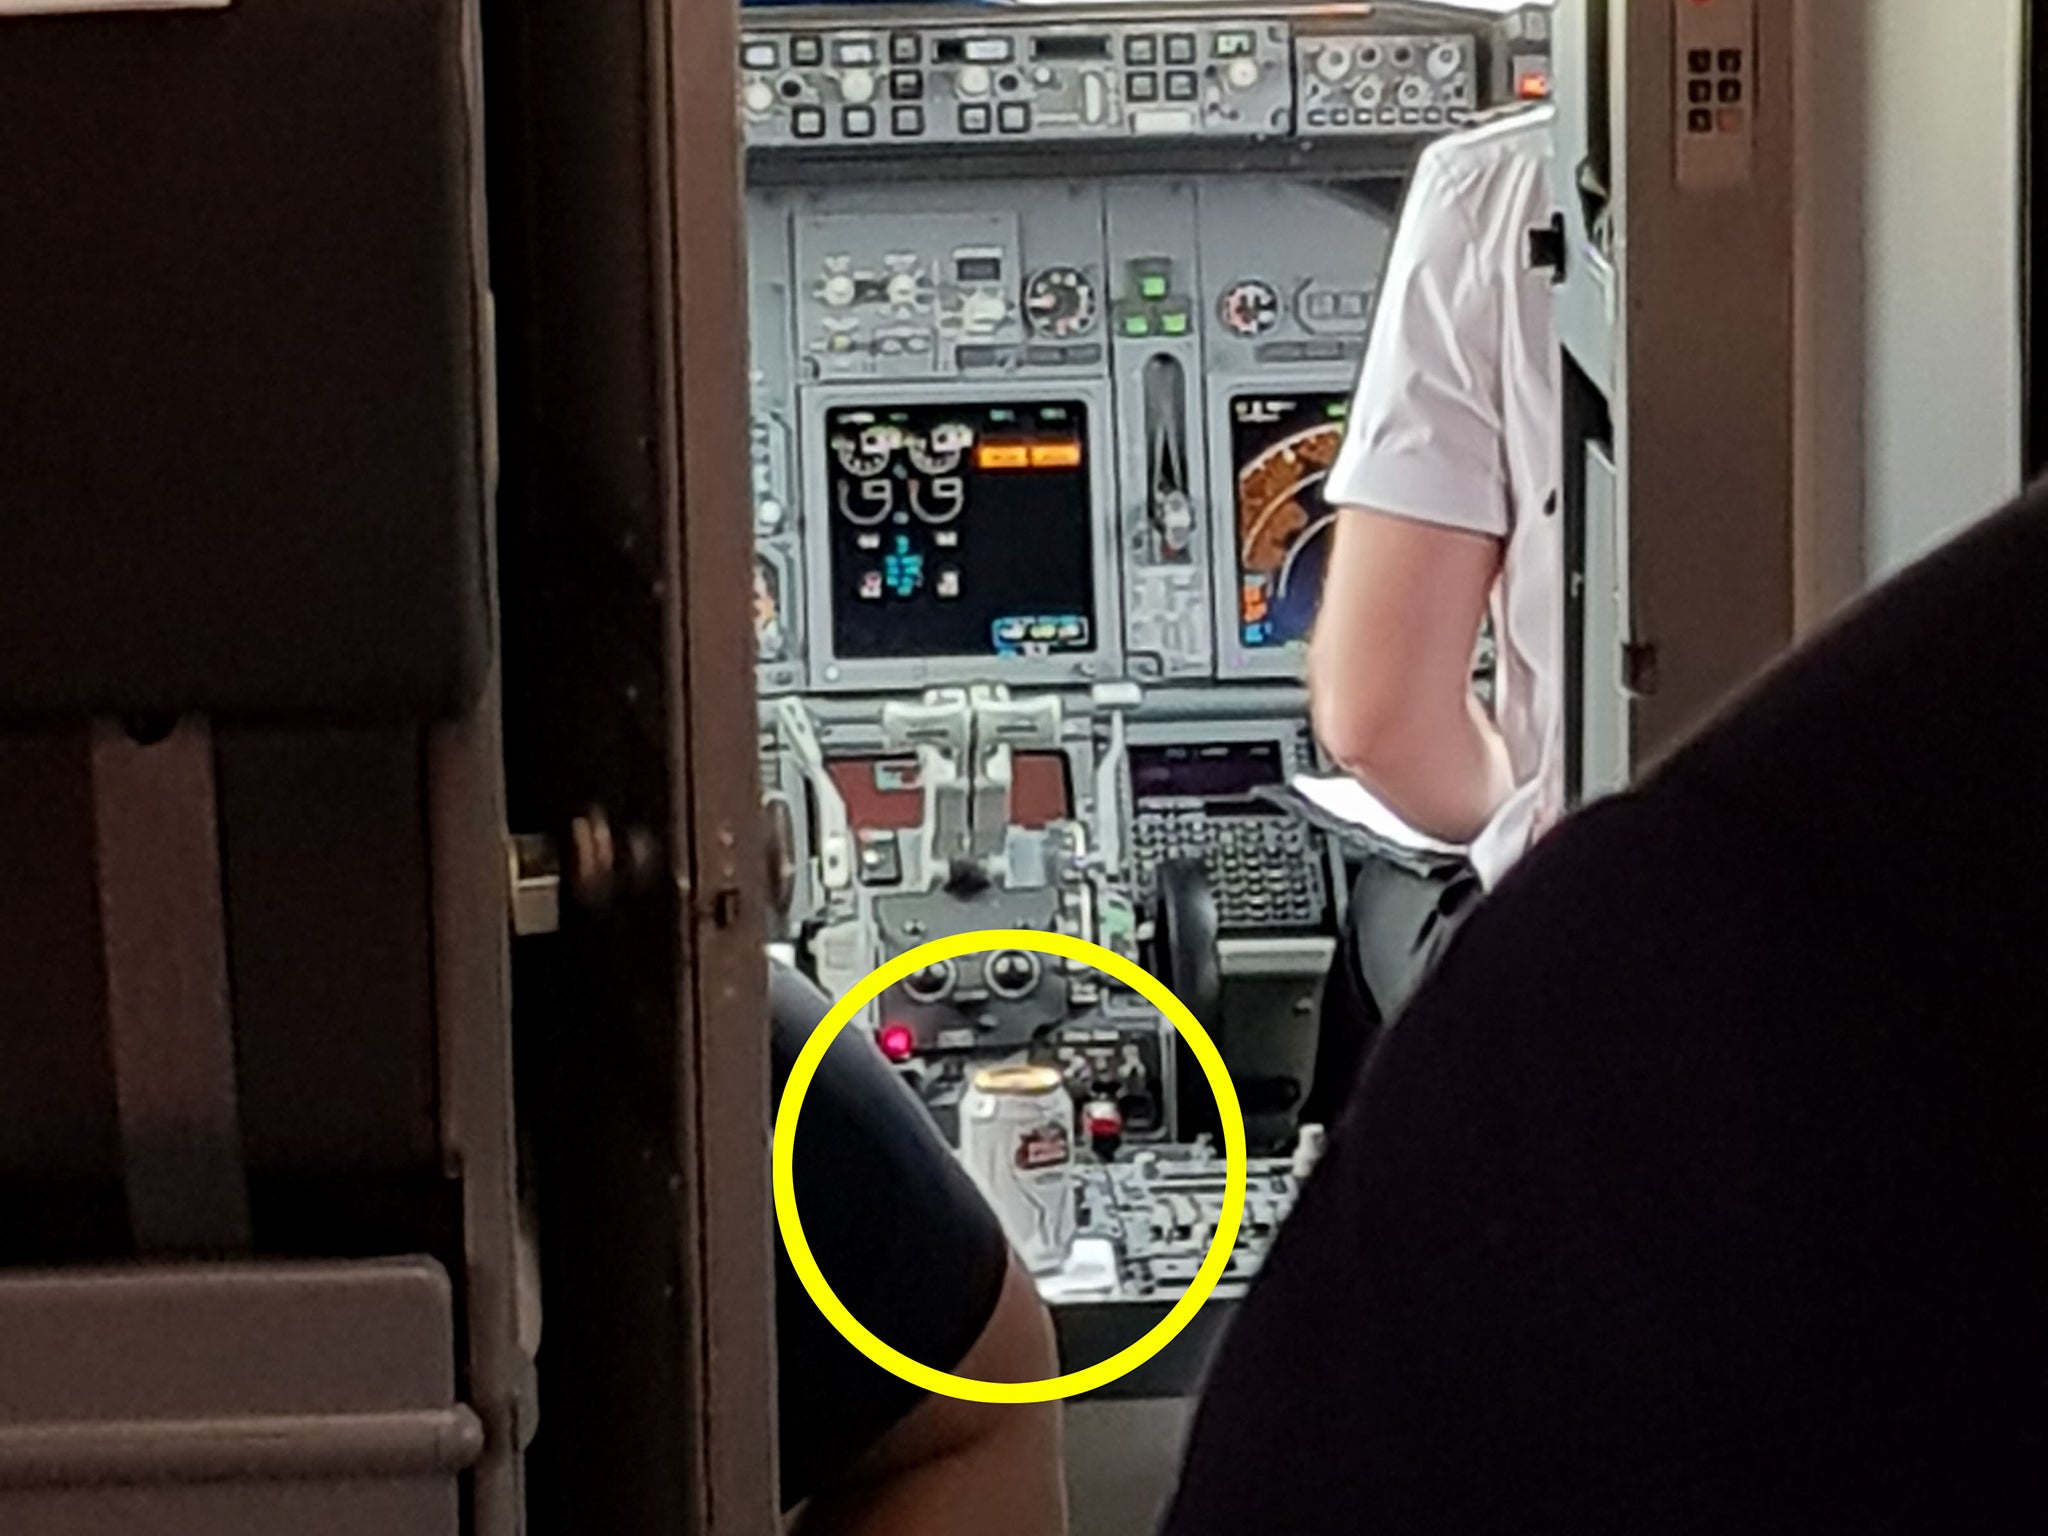 Jet2 had an embarrassing incident earlier this year when it was claimed a pilot was seen with a can of Stella Artois in the cockpit